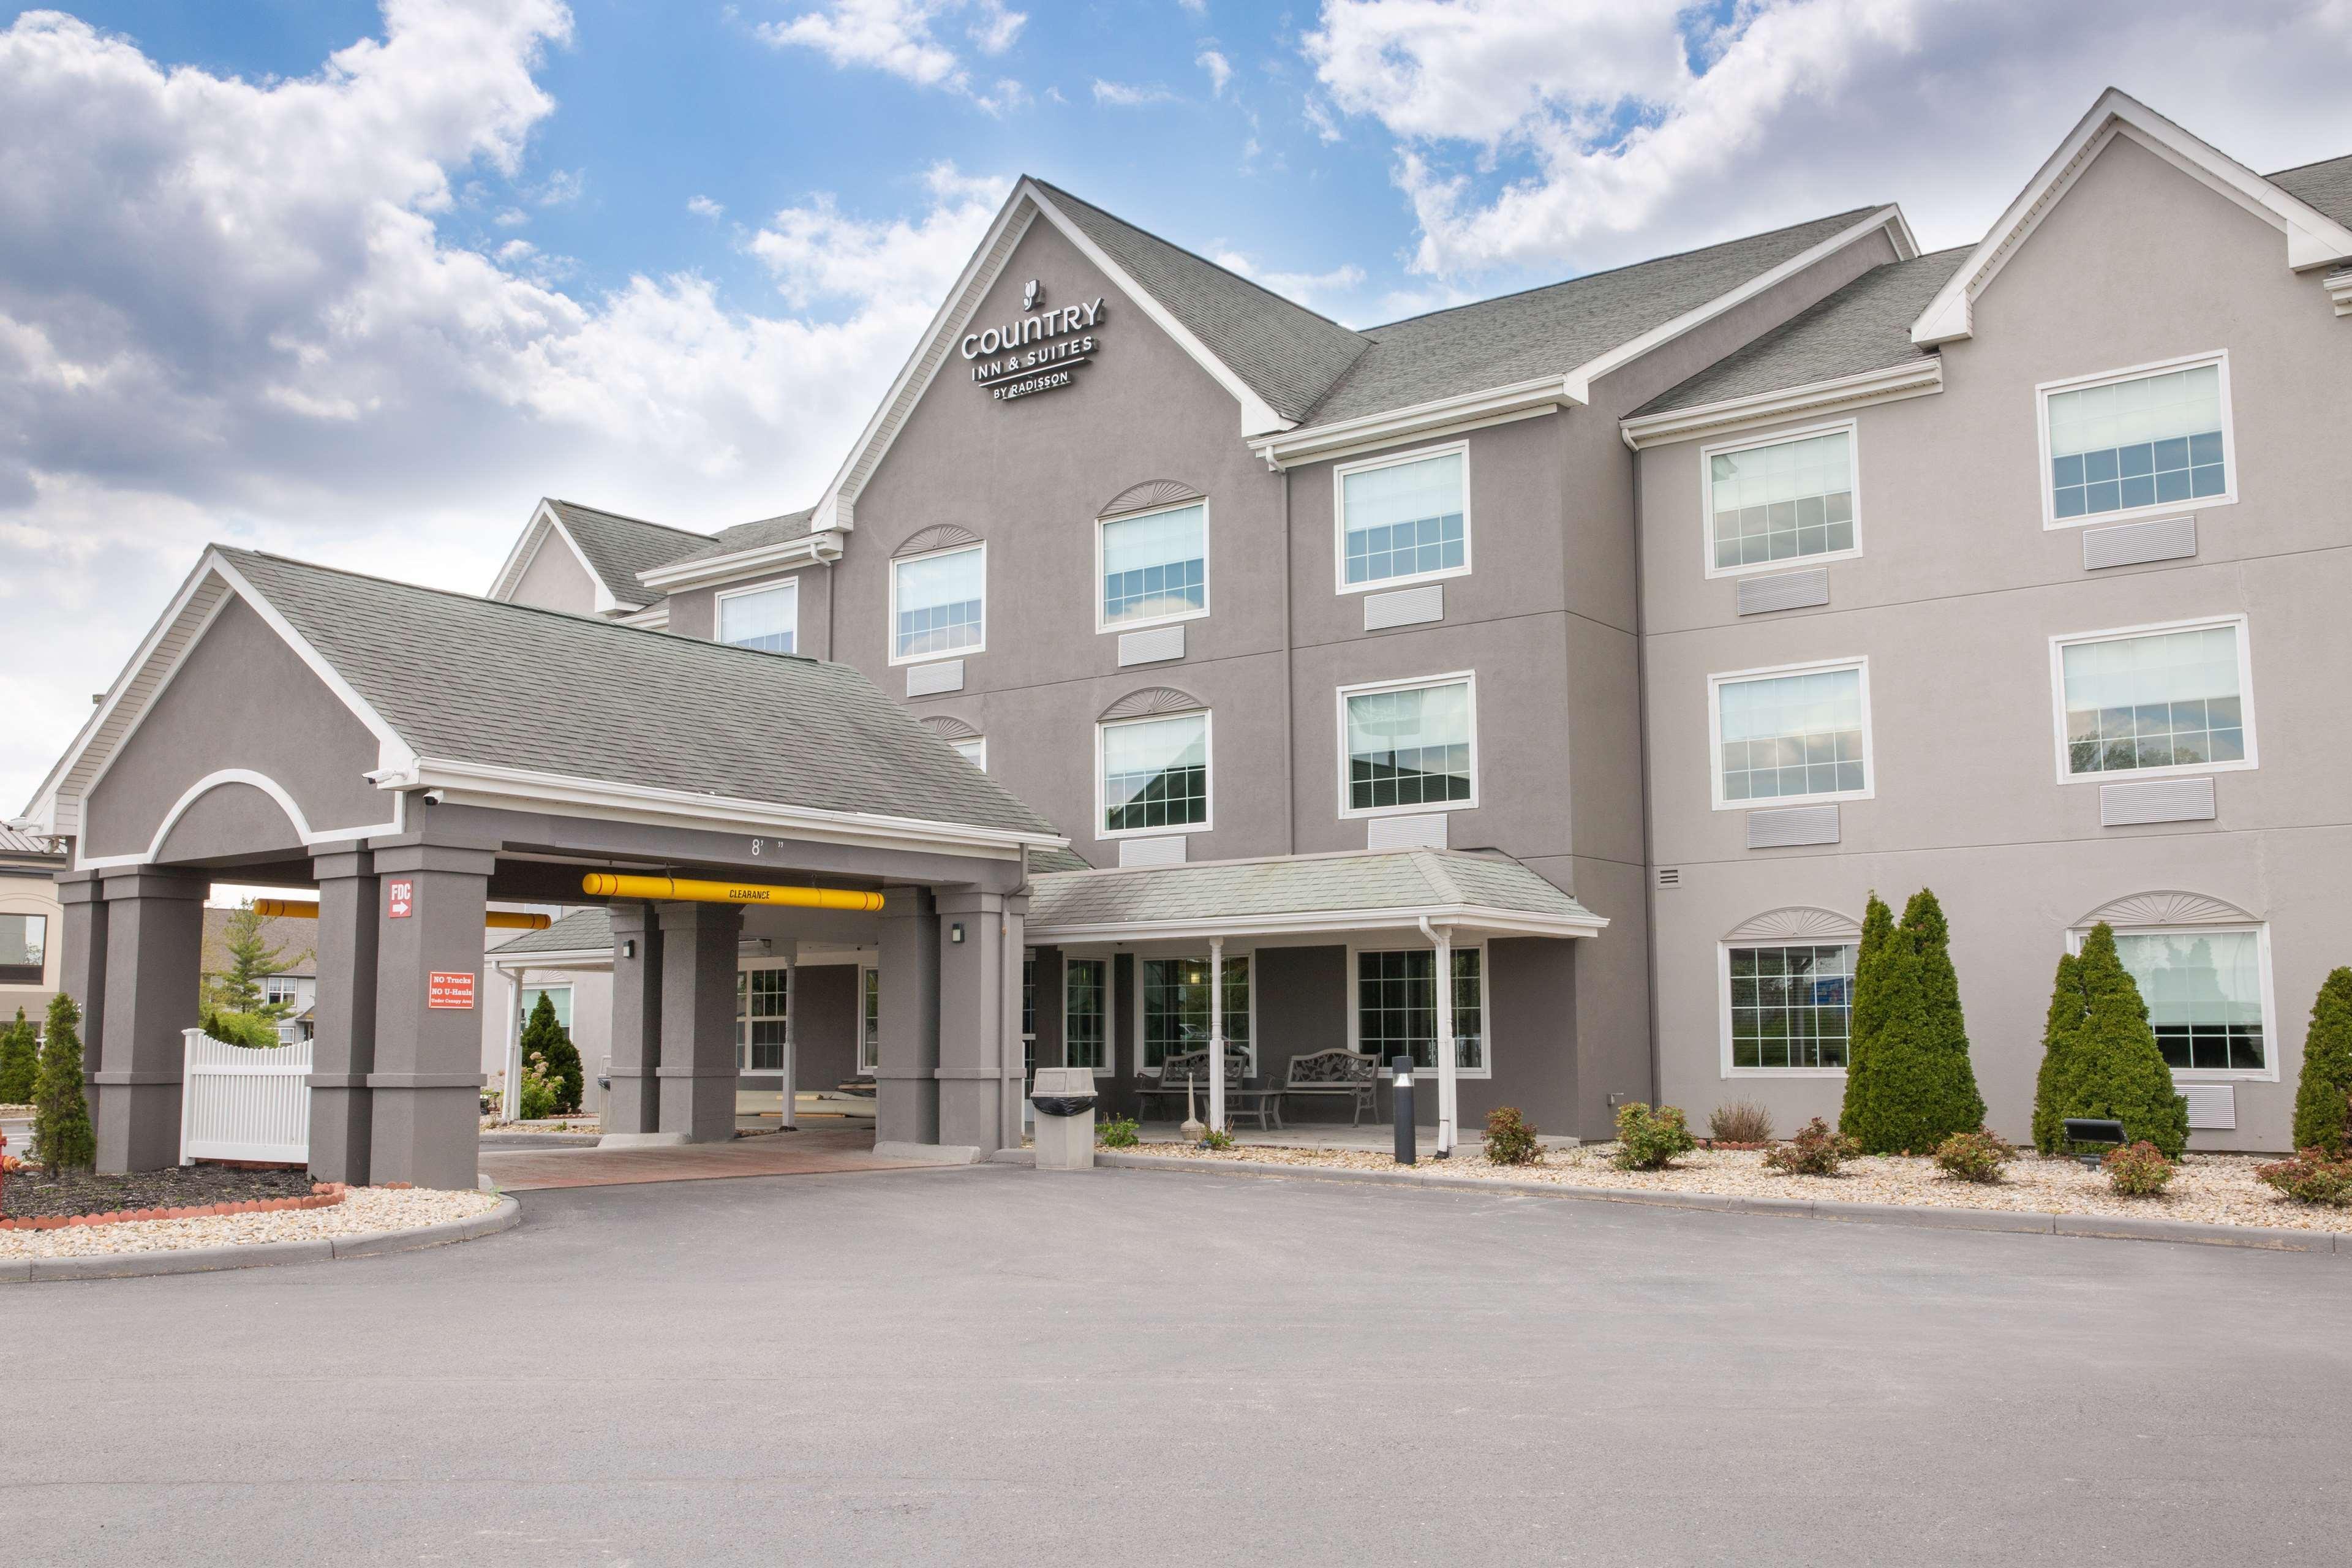 Country Inn & Suites Birch Run-Frankenmuth in Birch Run, the United States  from C$ 90: Deals, Reviews, Photos